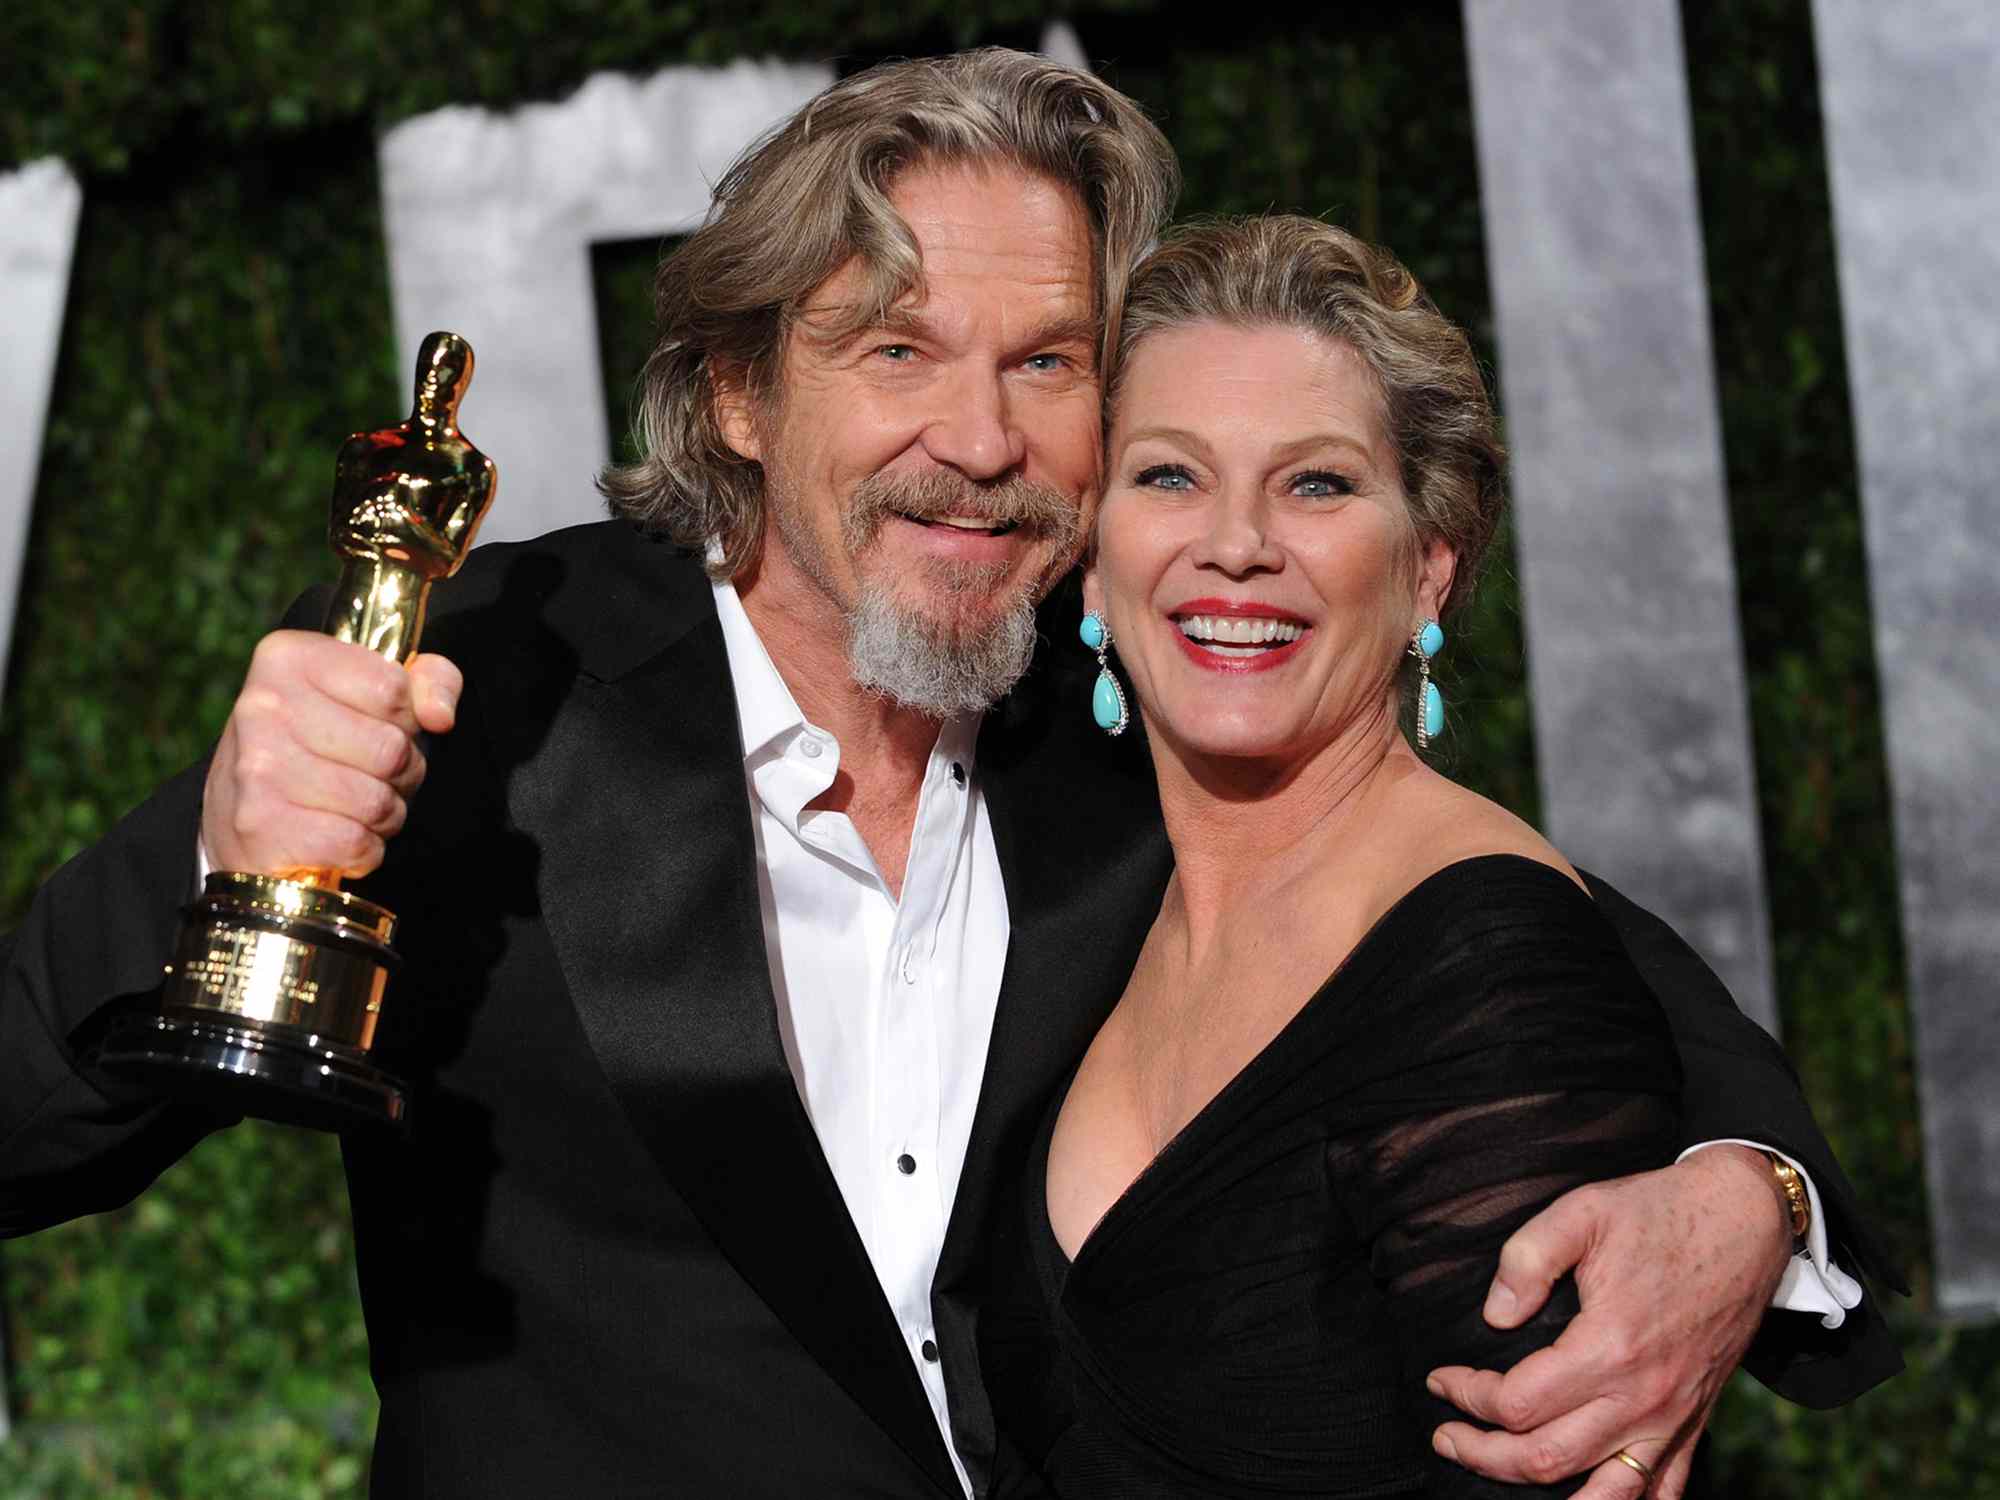 Jeff Bridges (L) and Susan Geston arrive at the 2010 Vanity Fair Oscar Party hosted by Graydon Carter held at Sunset Tower on March 7, 2010 in West Hollywood, California